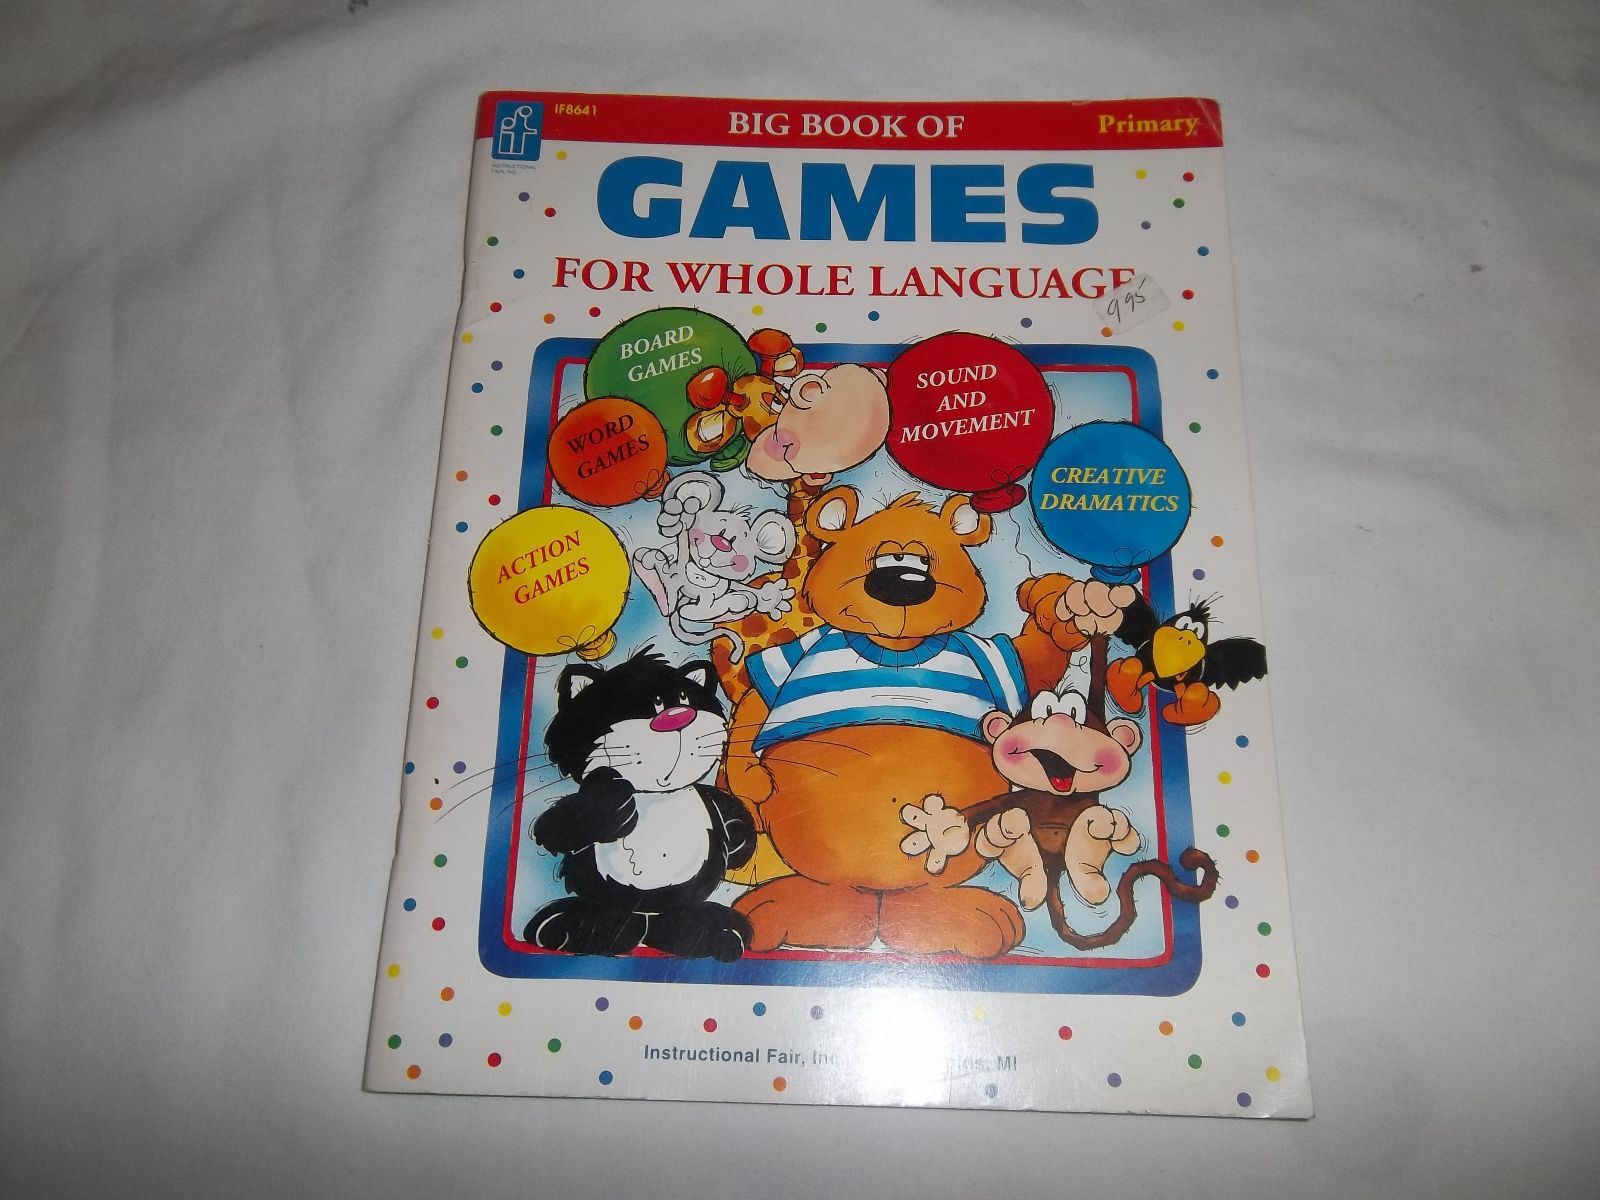 IF 8641 BIG BOOK OF GAMES FOR WHOLE LANGUAGE PAPERBACK REPRODUCIBLE